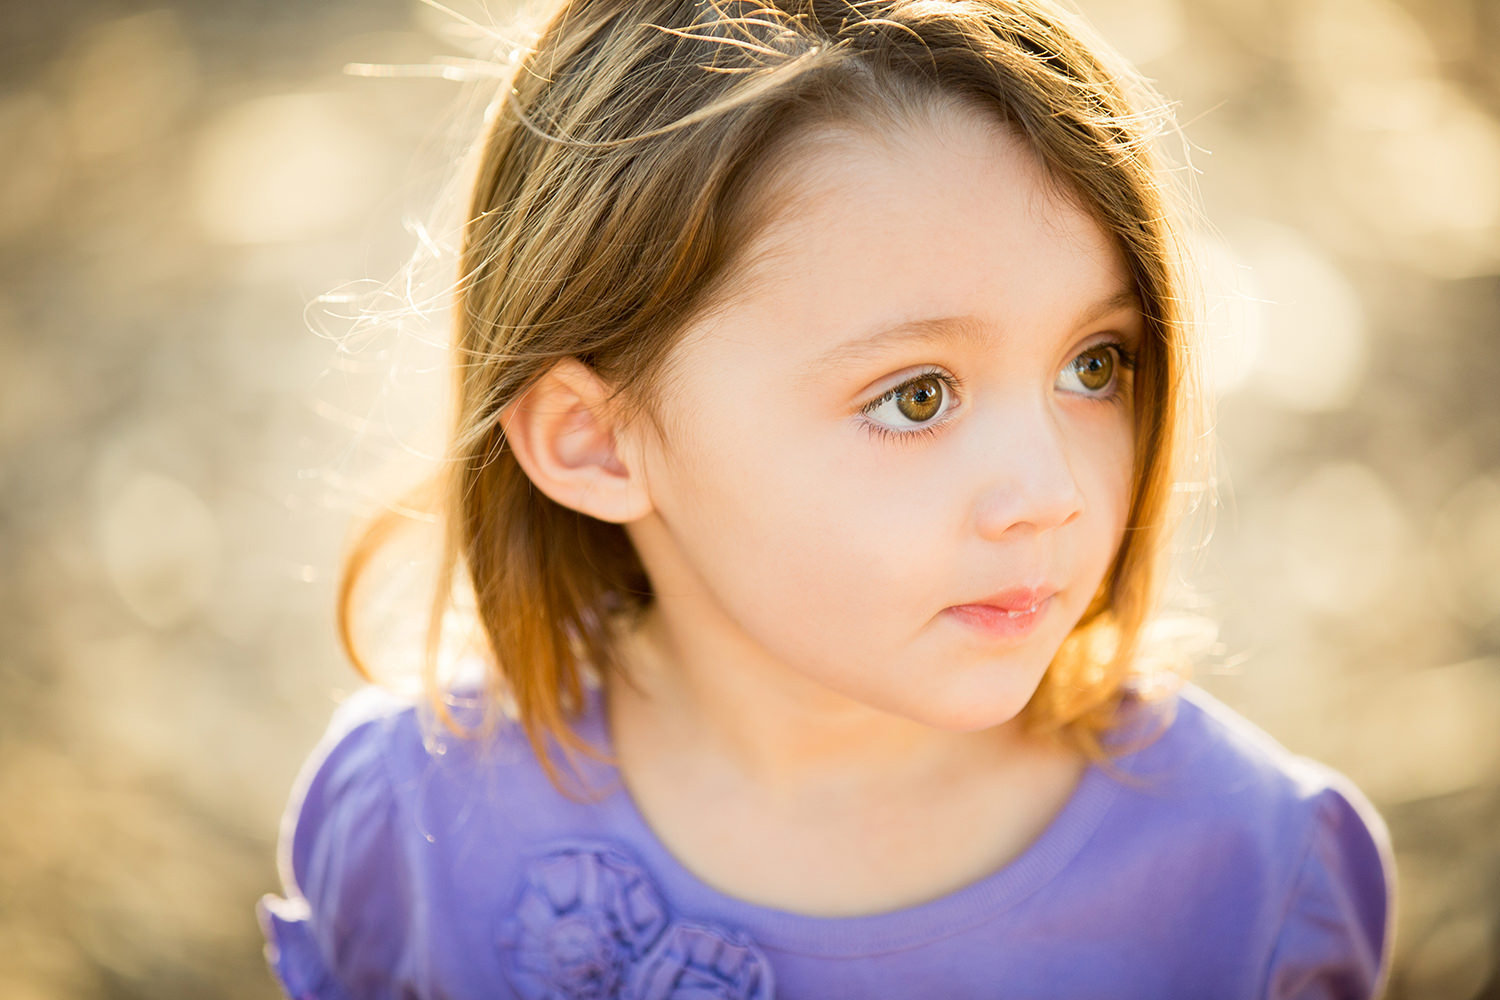 san diego family photographer | little girl looking away from camera hair blowing in the wind